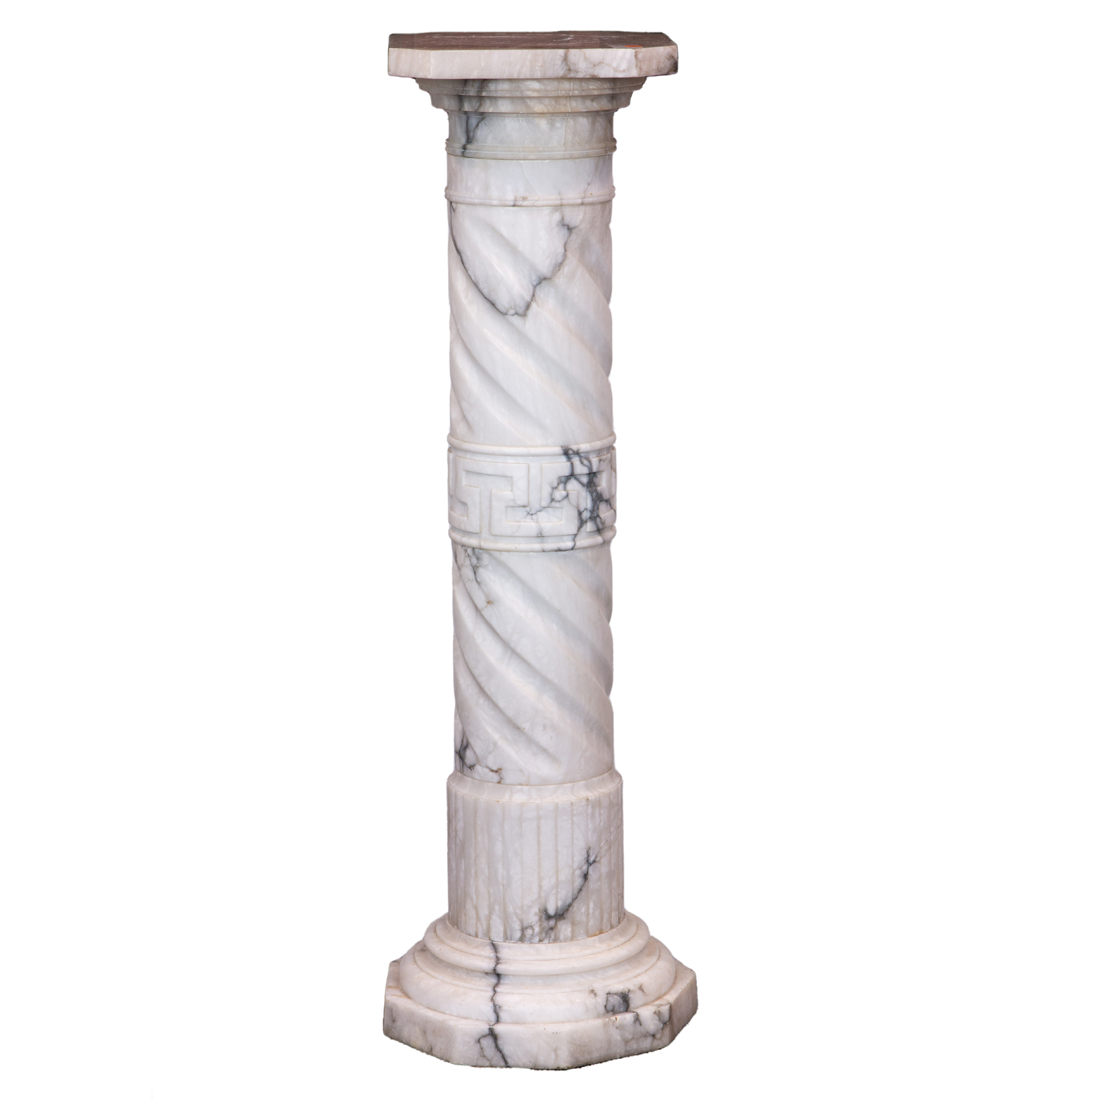 A NEOCLASSICAL STYLE ALABASTER